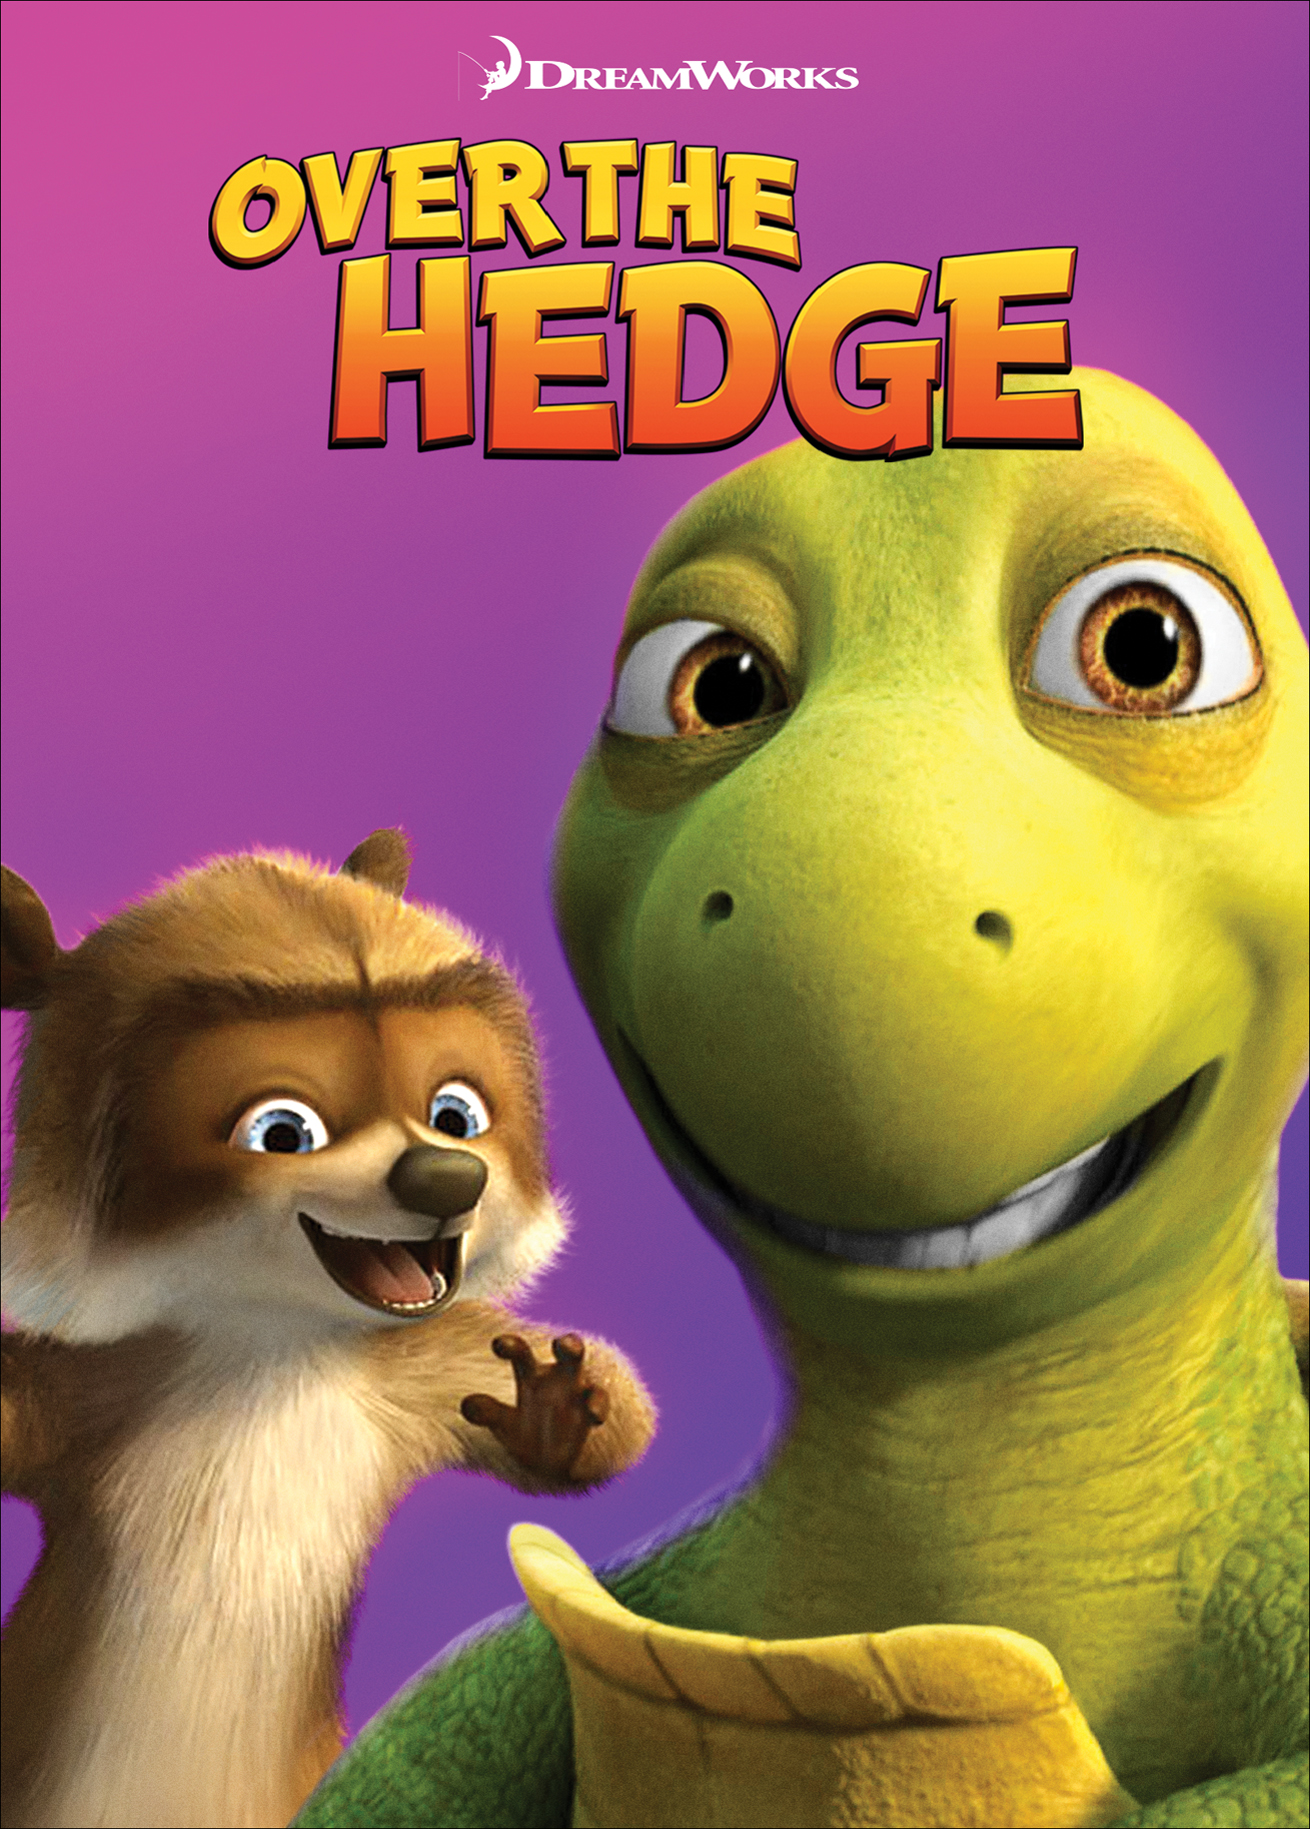 Over the Hedge [Includes Digital Copy] [Blu-ray] [2006] Best Buy